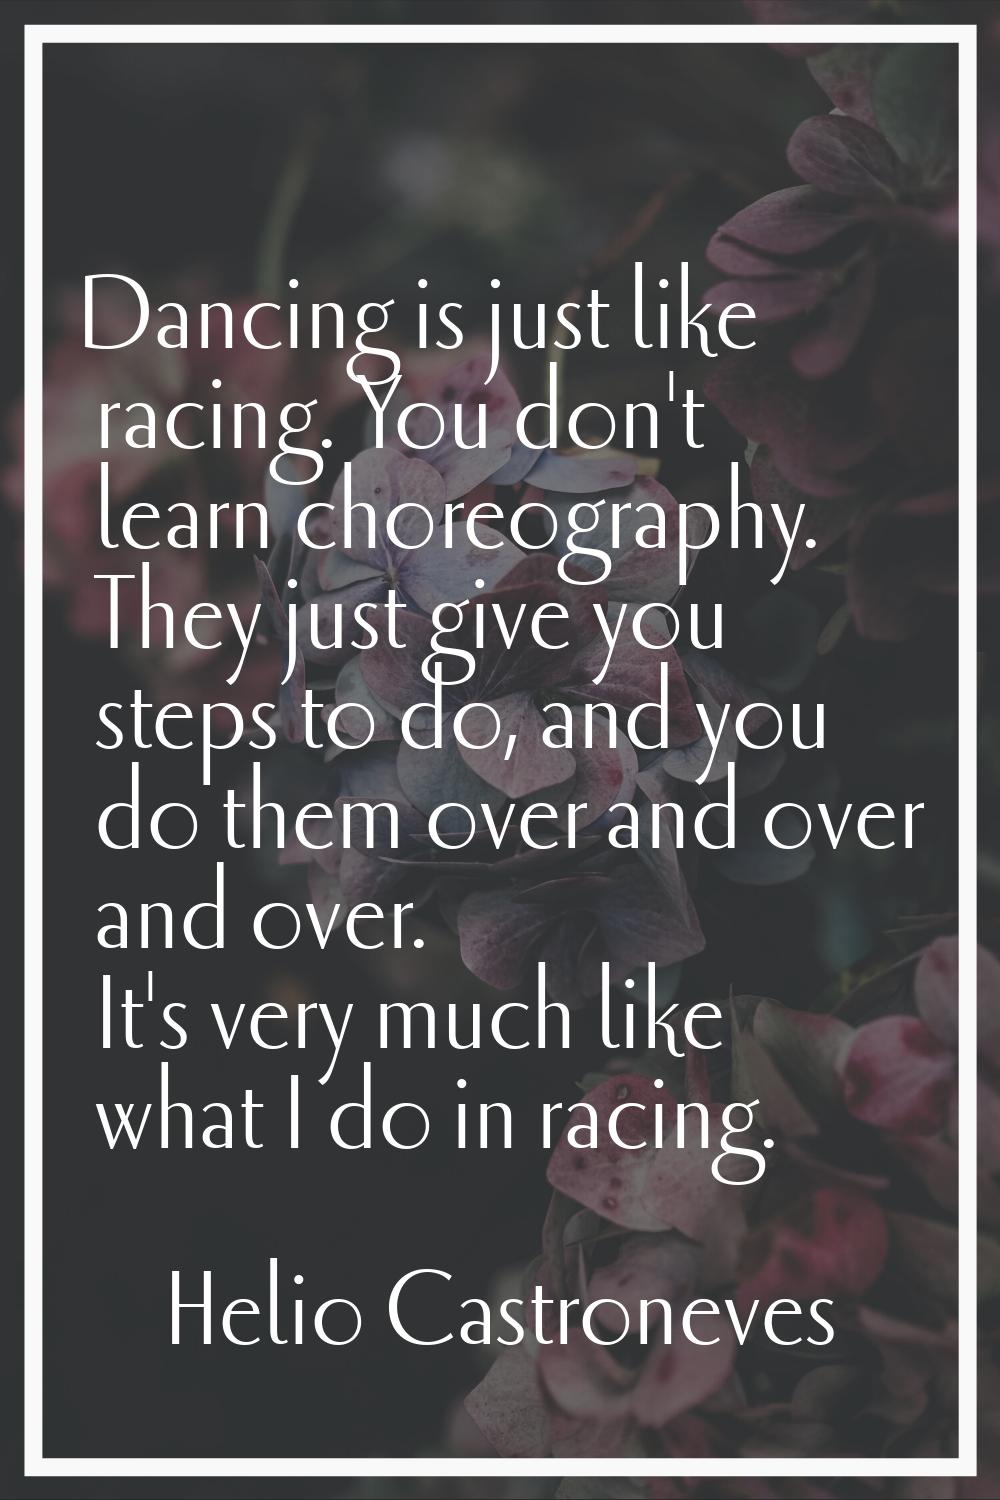 Dancing is just like racing. You don't learn choreography. They just give you steps to do, and you 